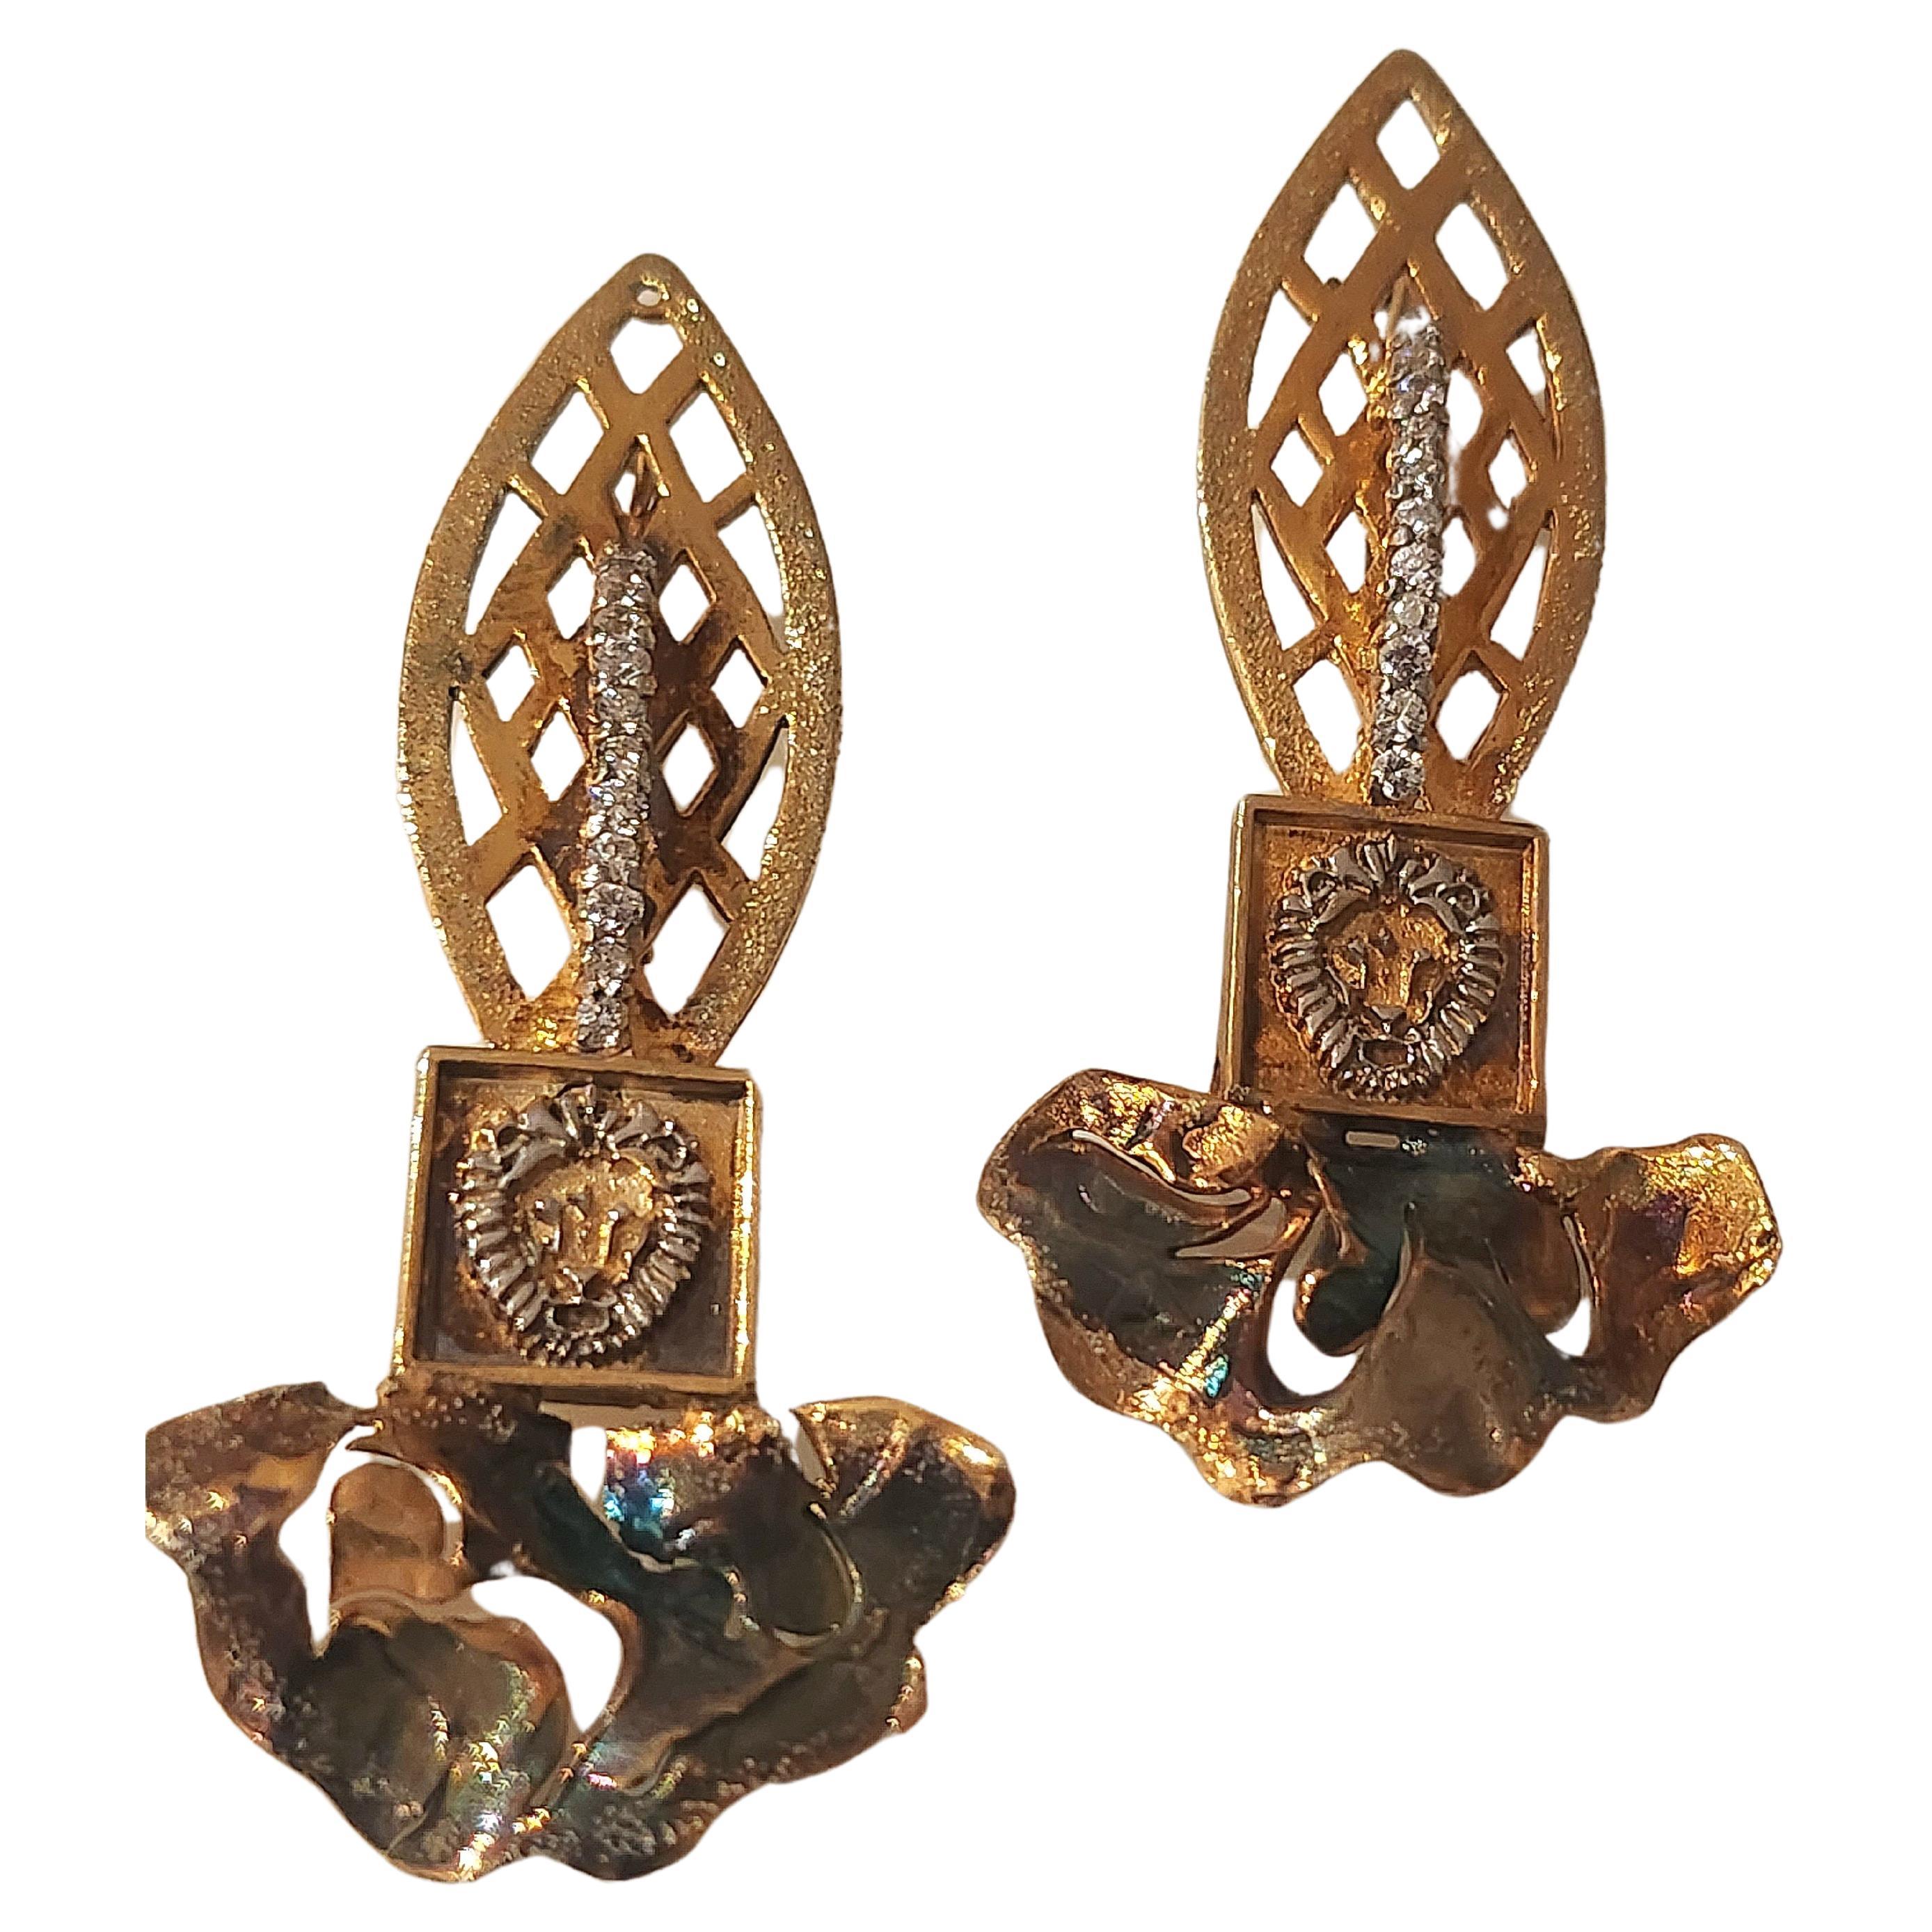 Silver 925 large hand made earrings gold plated with 750k gold finest decorted with colorful hand painted enamel in byzantine designe 